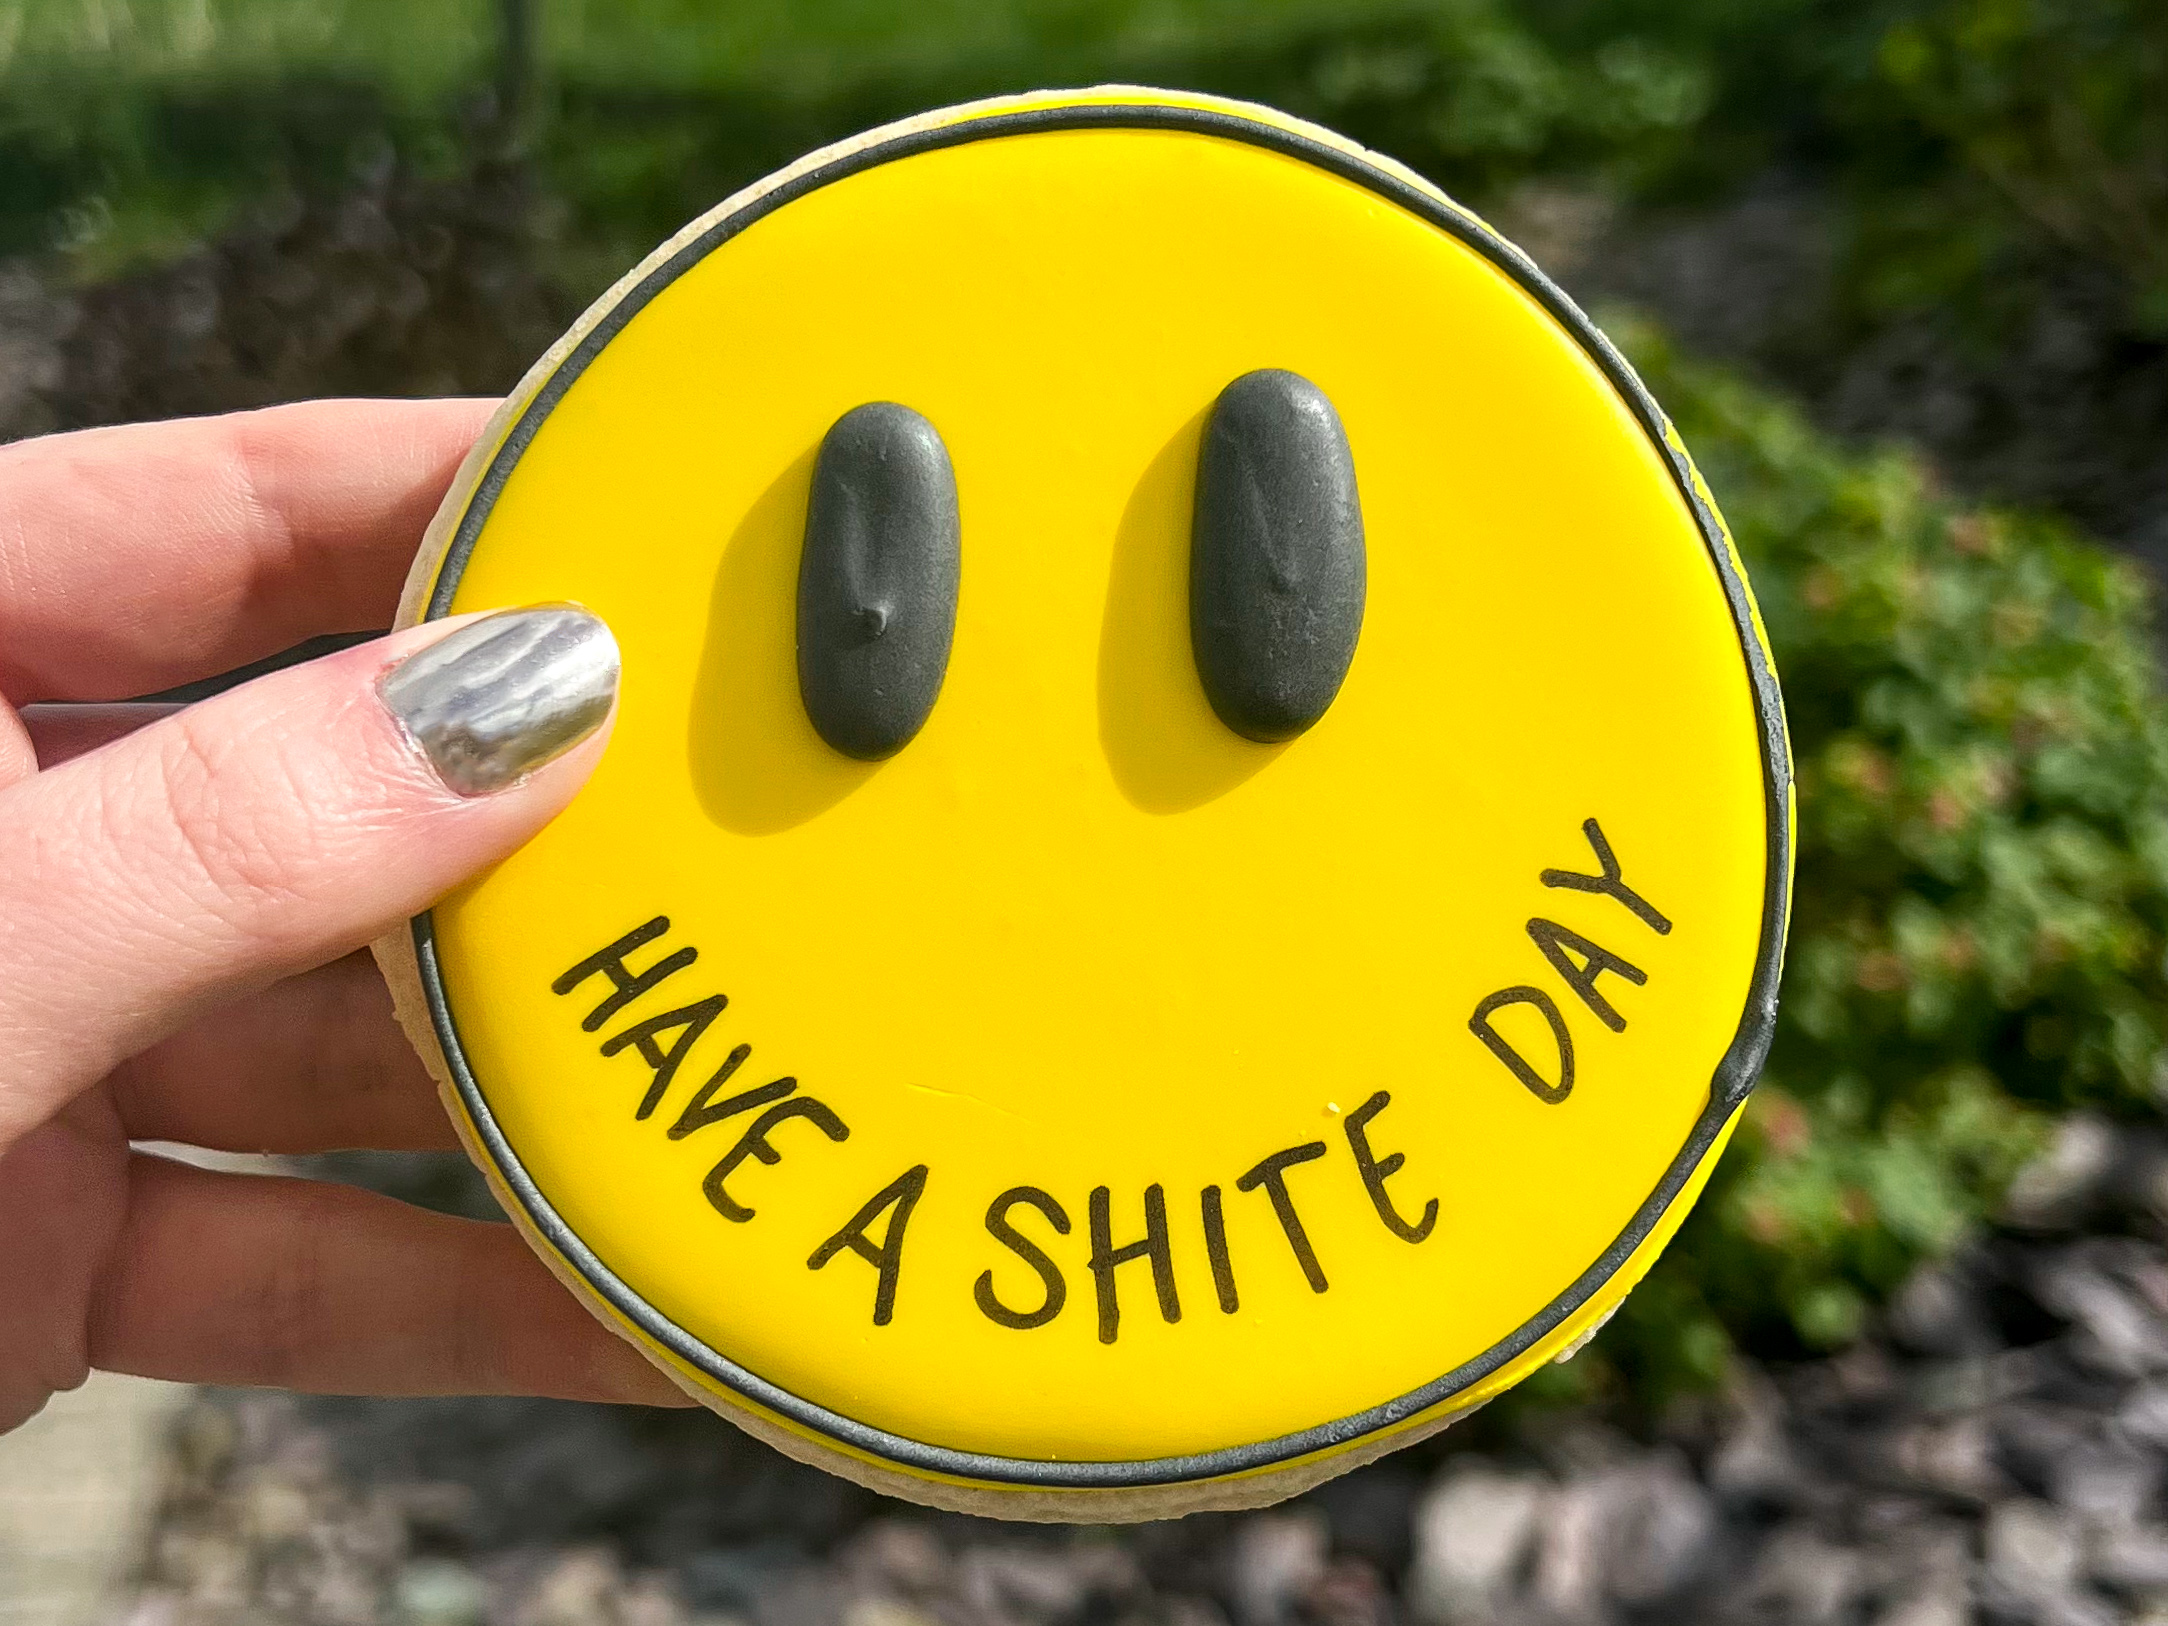 Smiley face cookie from Rude Cookies that reads "have a shite day"